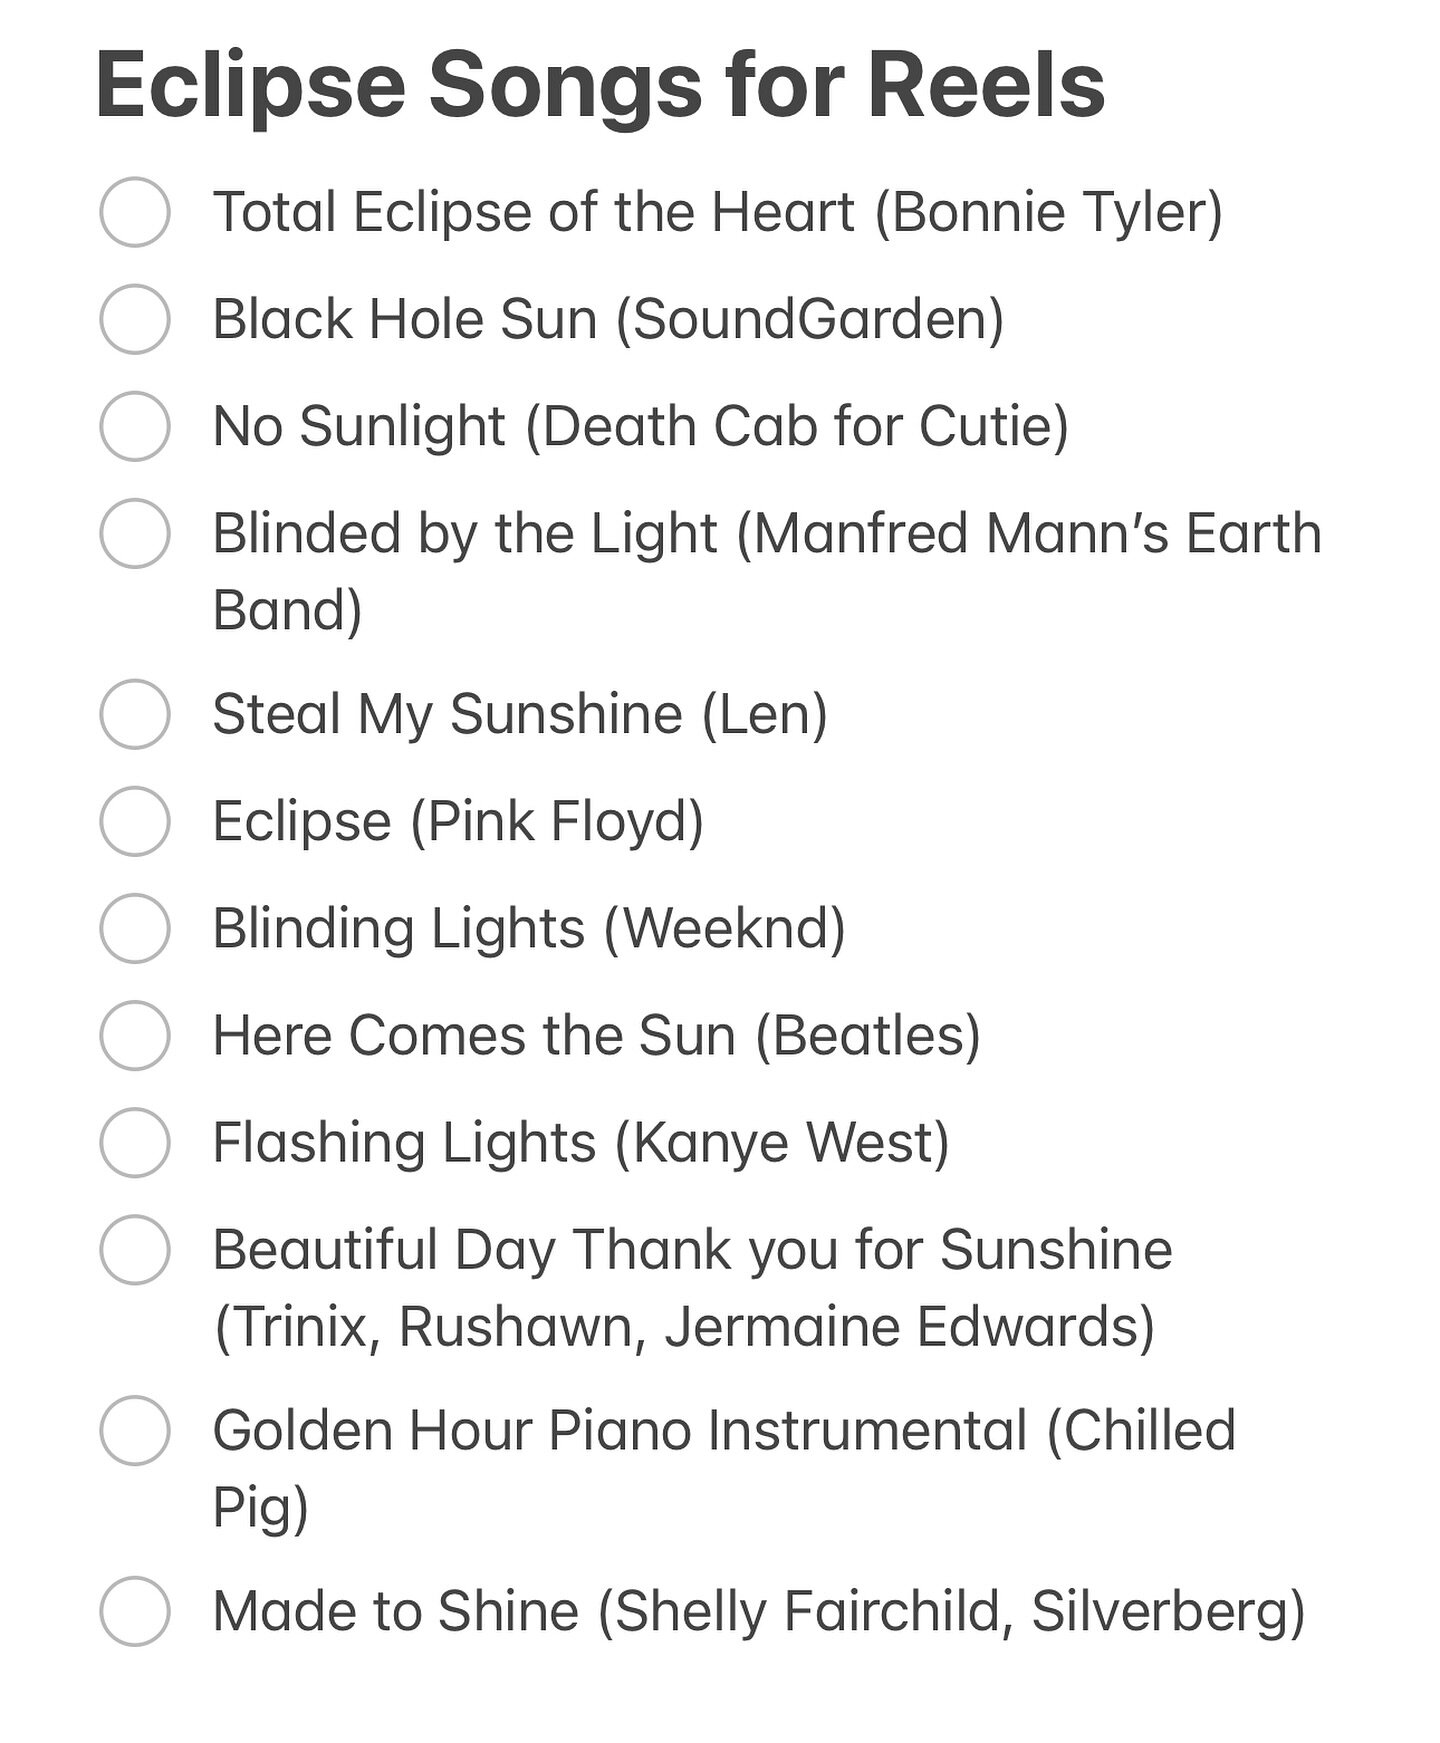 Planning some content for tomorrow&rsquo;s Eclipse? These songs are available in Instagram for Reels. I particularly like the ones that remind you to wear your glasses. 👓 ☀️🌘

For smartphones, you can use a spare pair of eclipse glasses and hold it